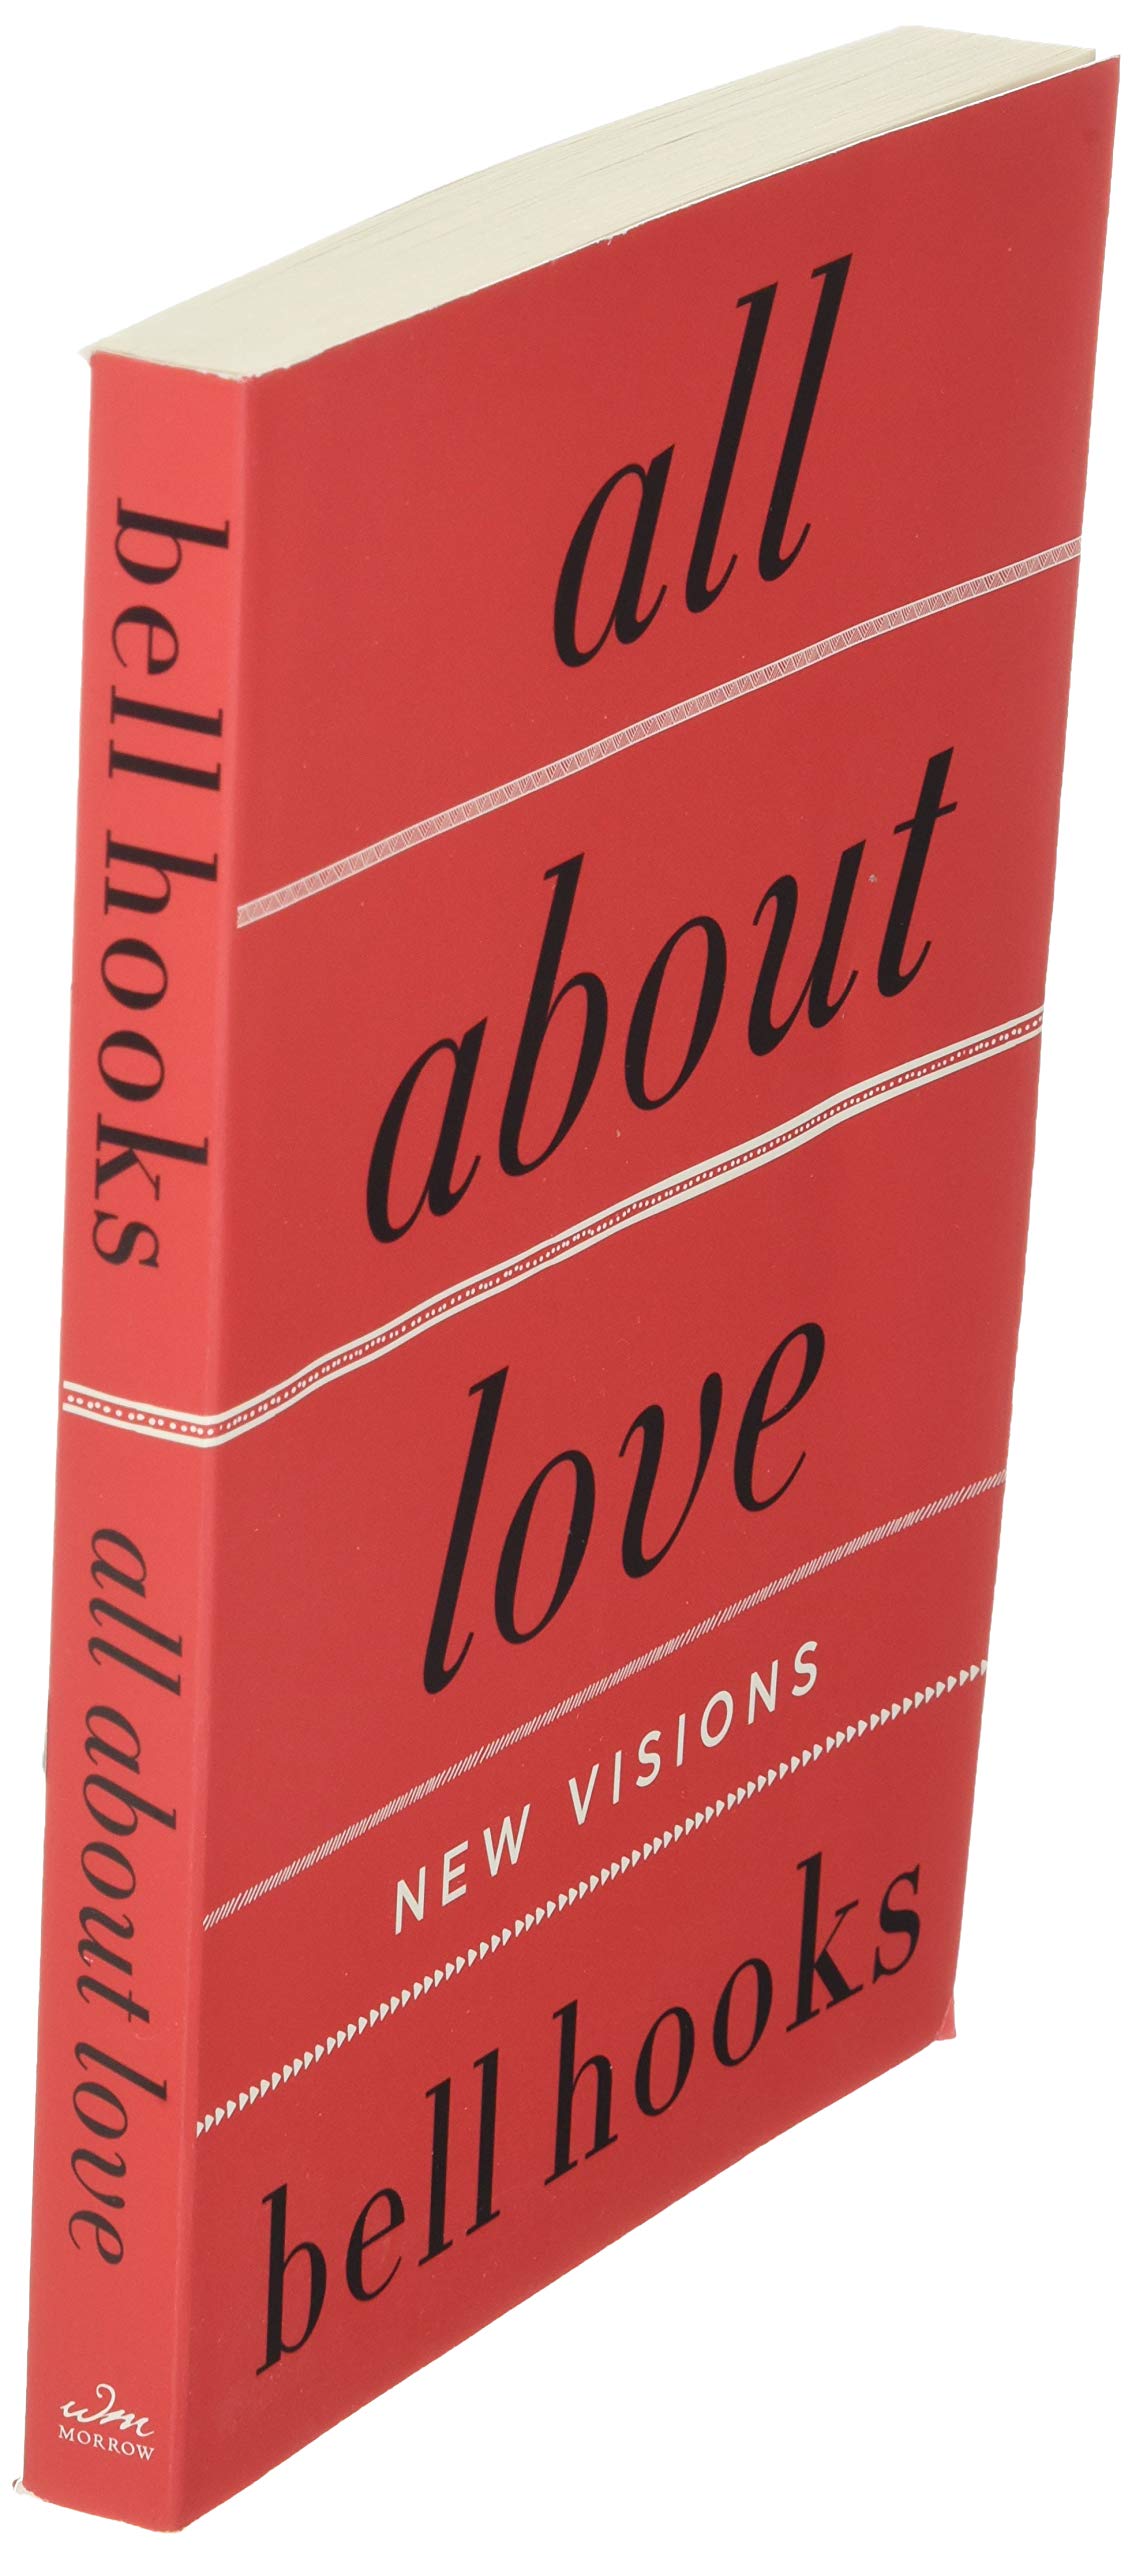 All about Love: New Visions by Bel Hooks